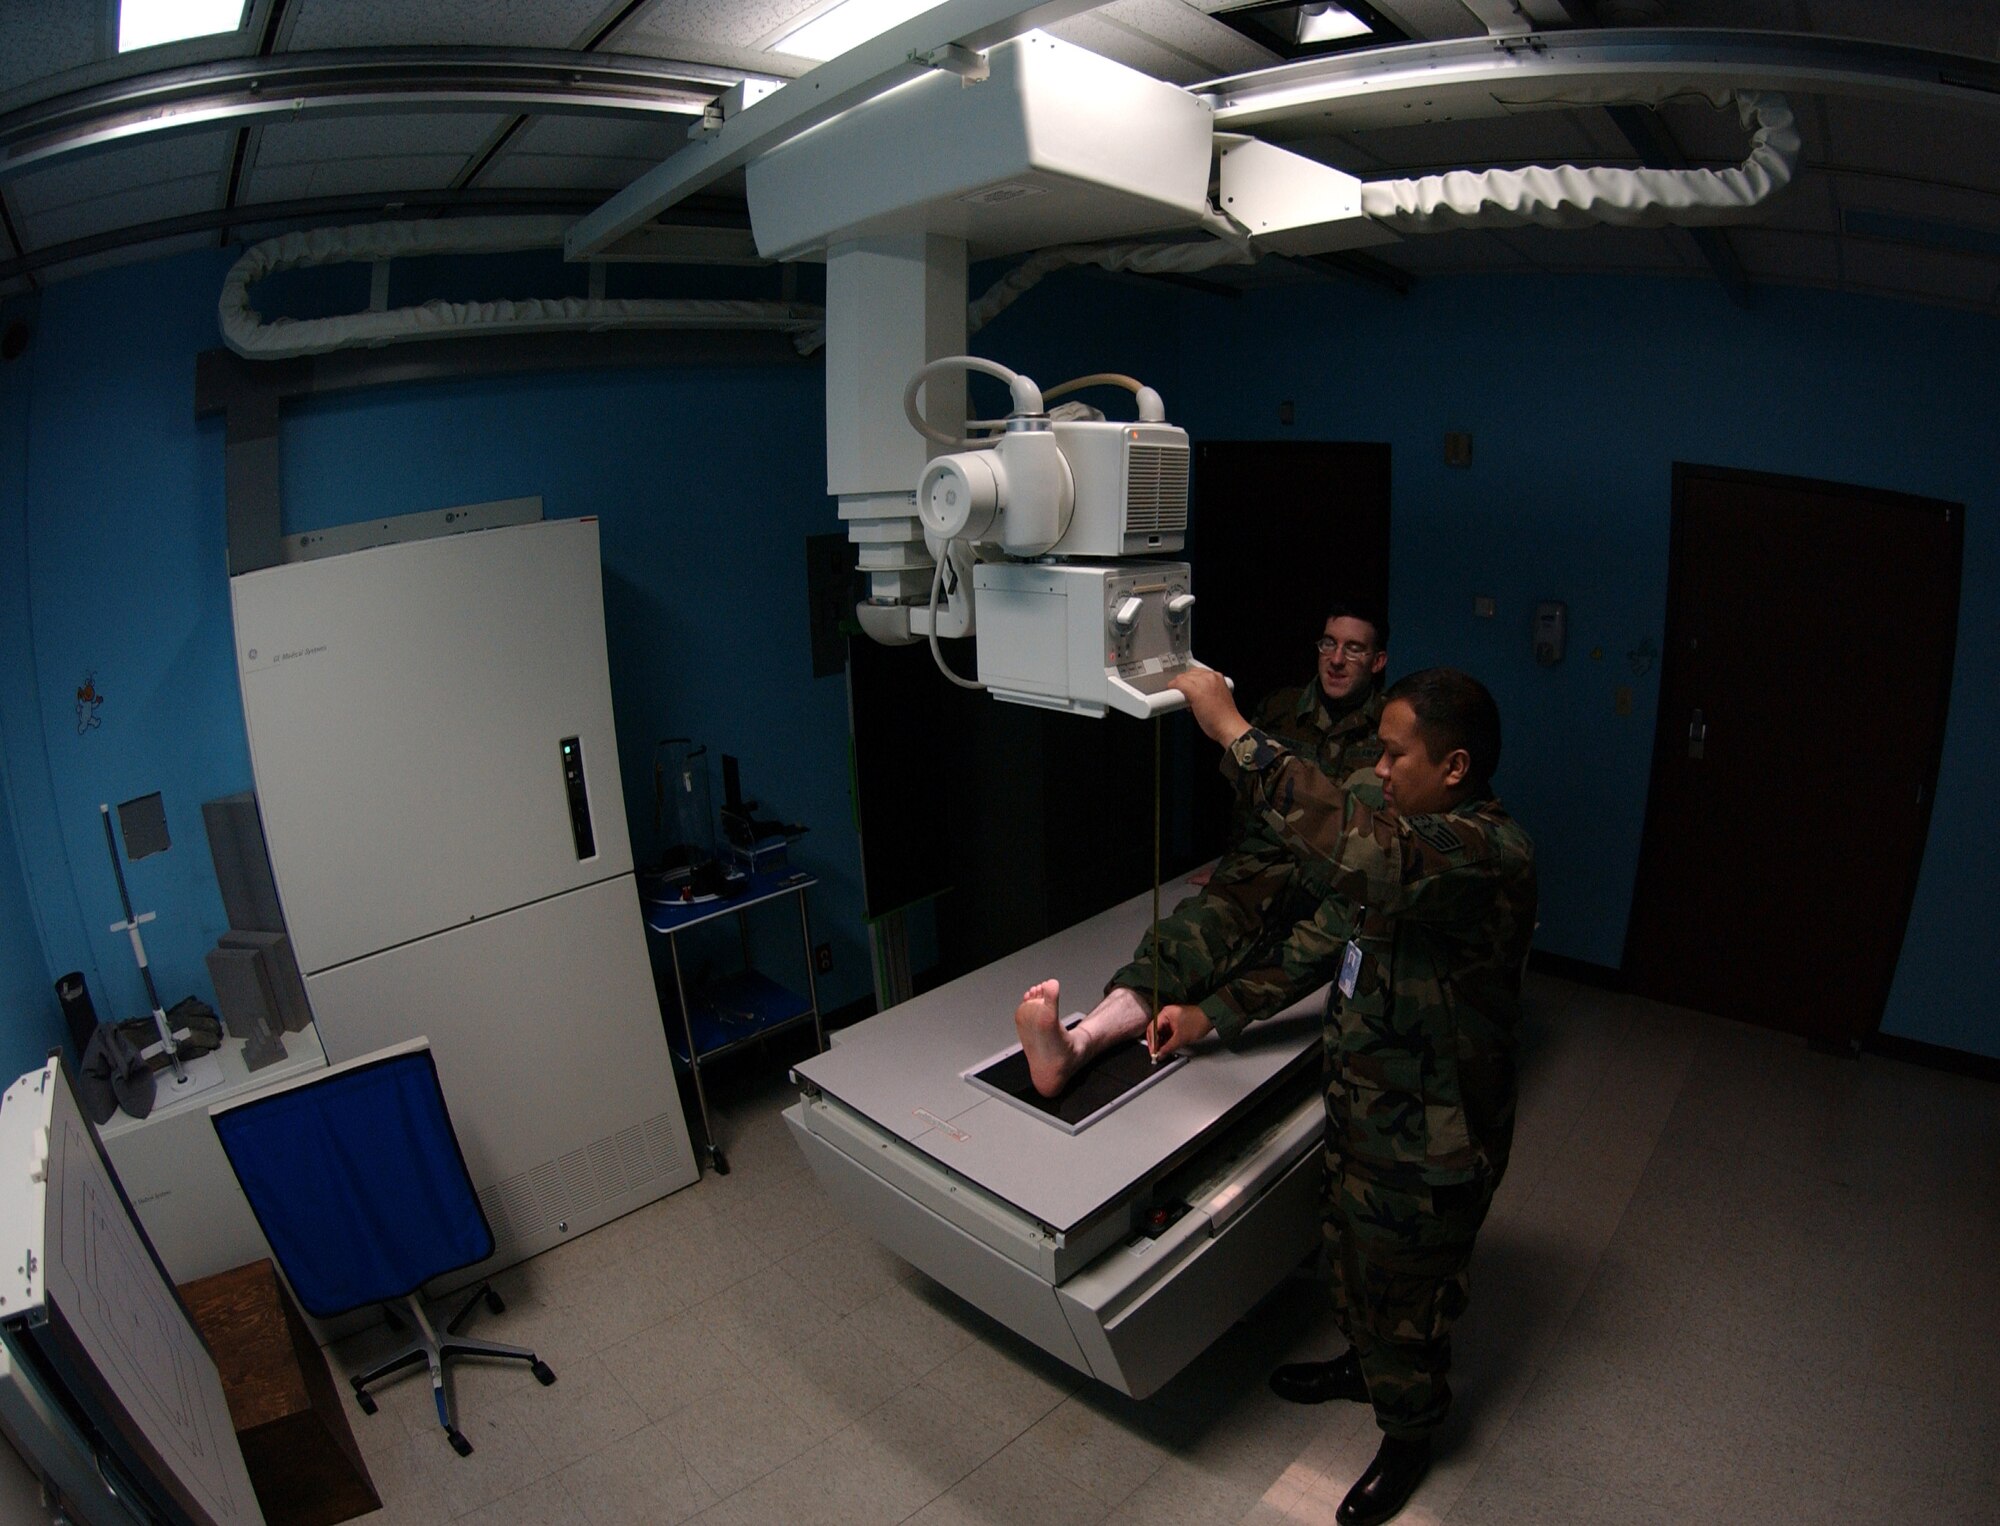 Diagnostic Imaging Technicians'  U.S Air Force Staff Sgt Rutherford Alejo (right) and Staff Sgt Joseph Moody (center) demonstrates how a patient with a possible ankle sprain or fracture is positioned and the proper distance is set between the injured area and the x-ray machine before the area of concern is x-rayed using the anterior- posterior exposure here at Eielson Air Force Base, Alaska on Feb 5, 2008. The anterior-posterior x-ray exposure means the x-rays will pass through the patient from front to back.

(U.S Air Force photo by: Staff Sgt Eric T. Sheler)